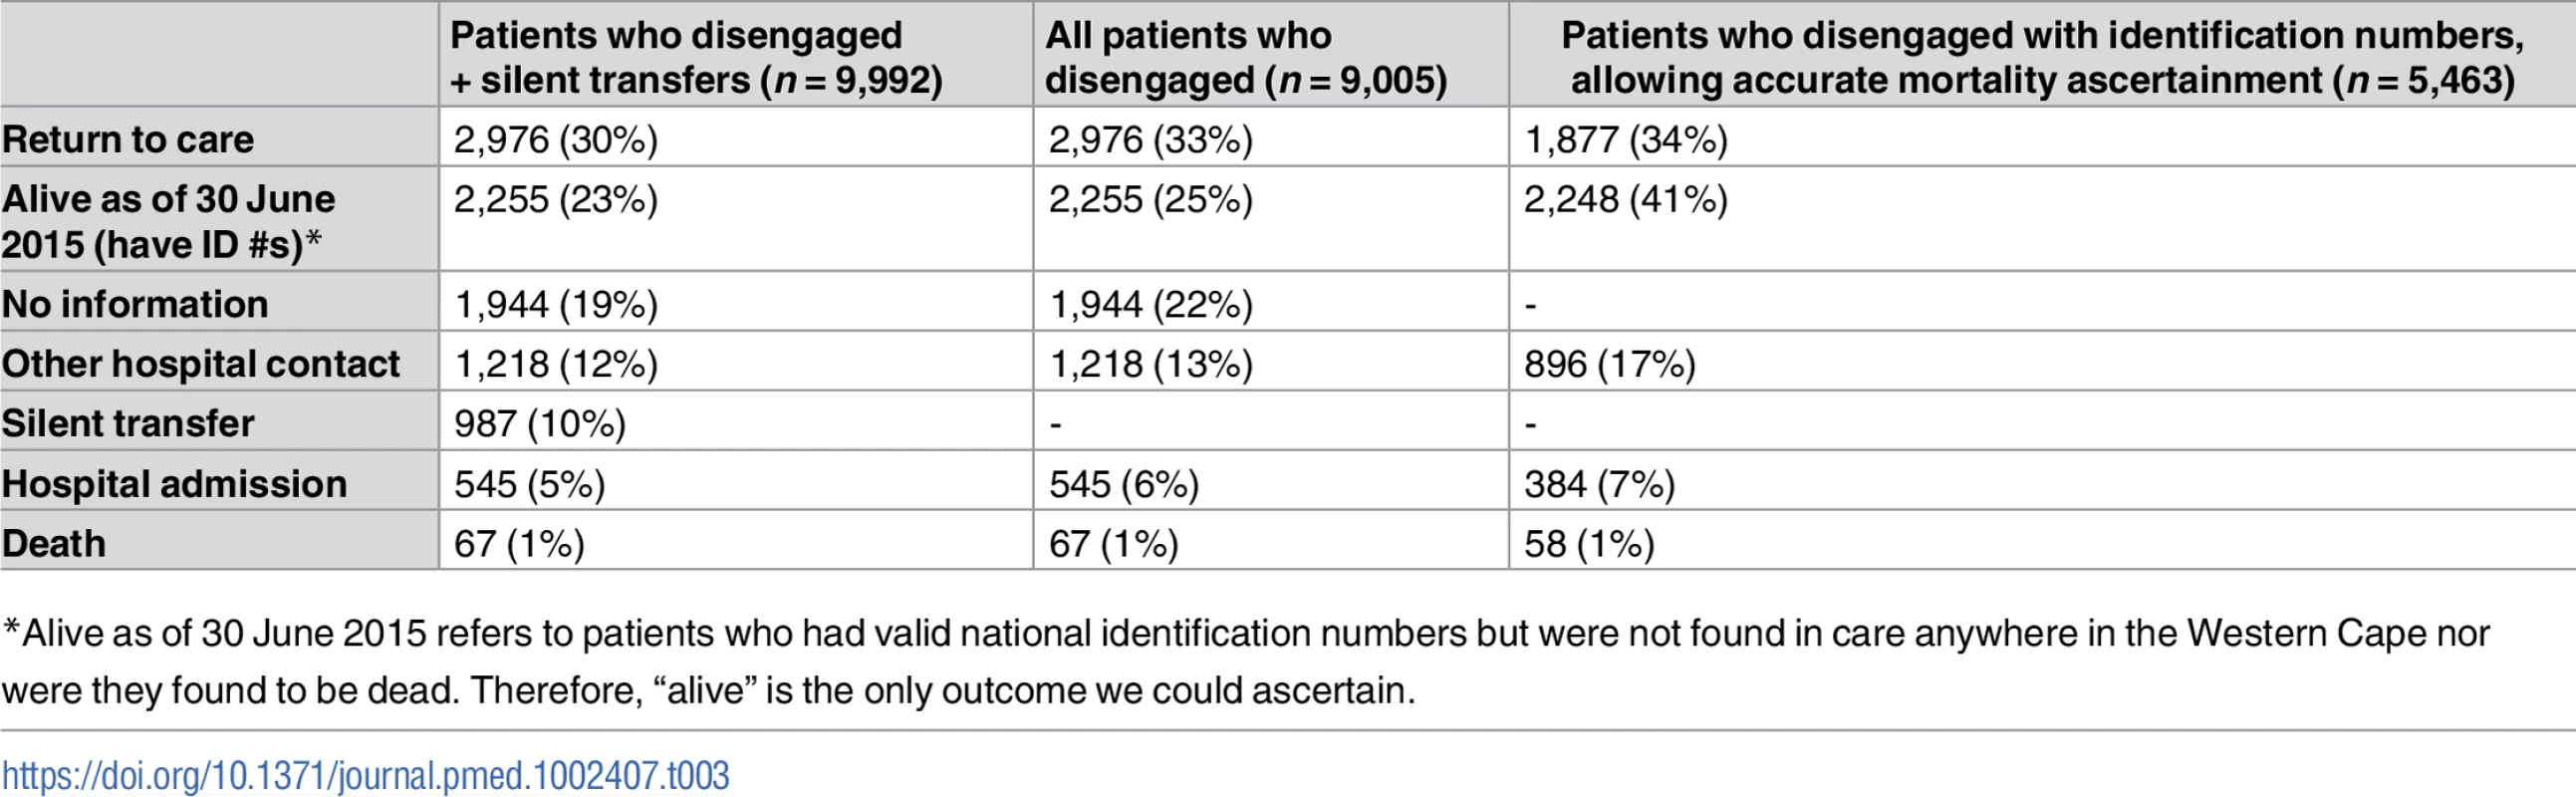 Initial outcomes for patients who disengaged, as ascertained from Western Cape province data systems until 30 June 2015.